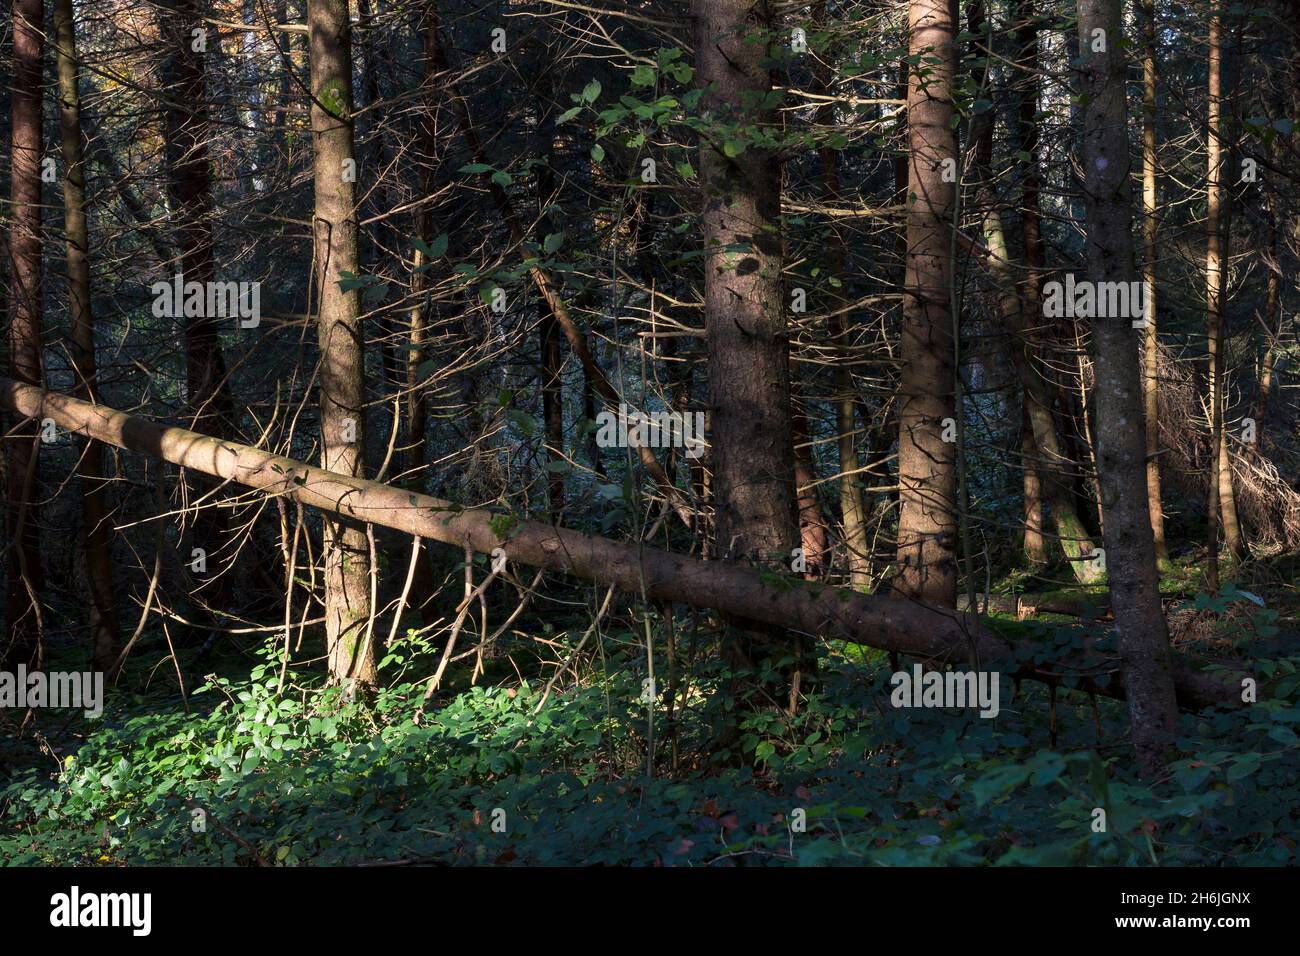 Fallen conifer trees with dead branches in a European forest in the suny light. Natural image as a symbol of the forest dieback and climate change Stock Photo